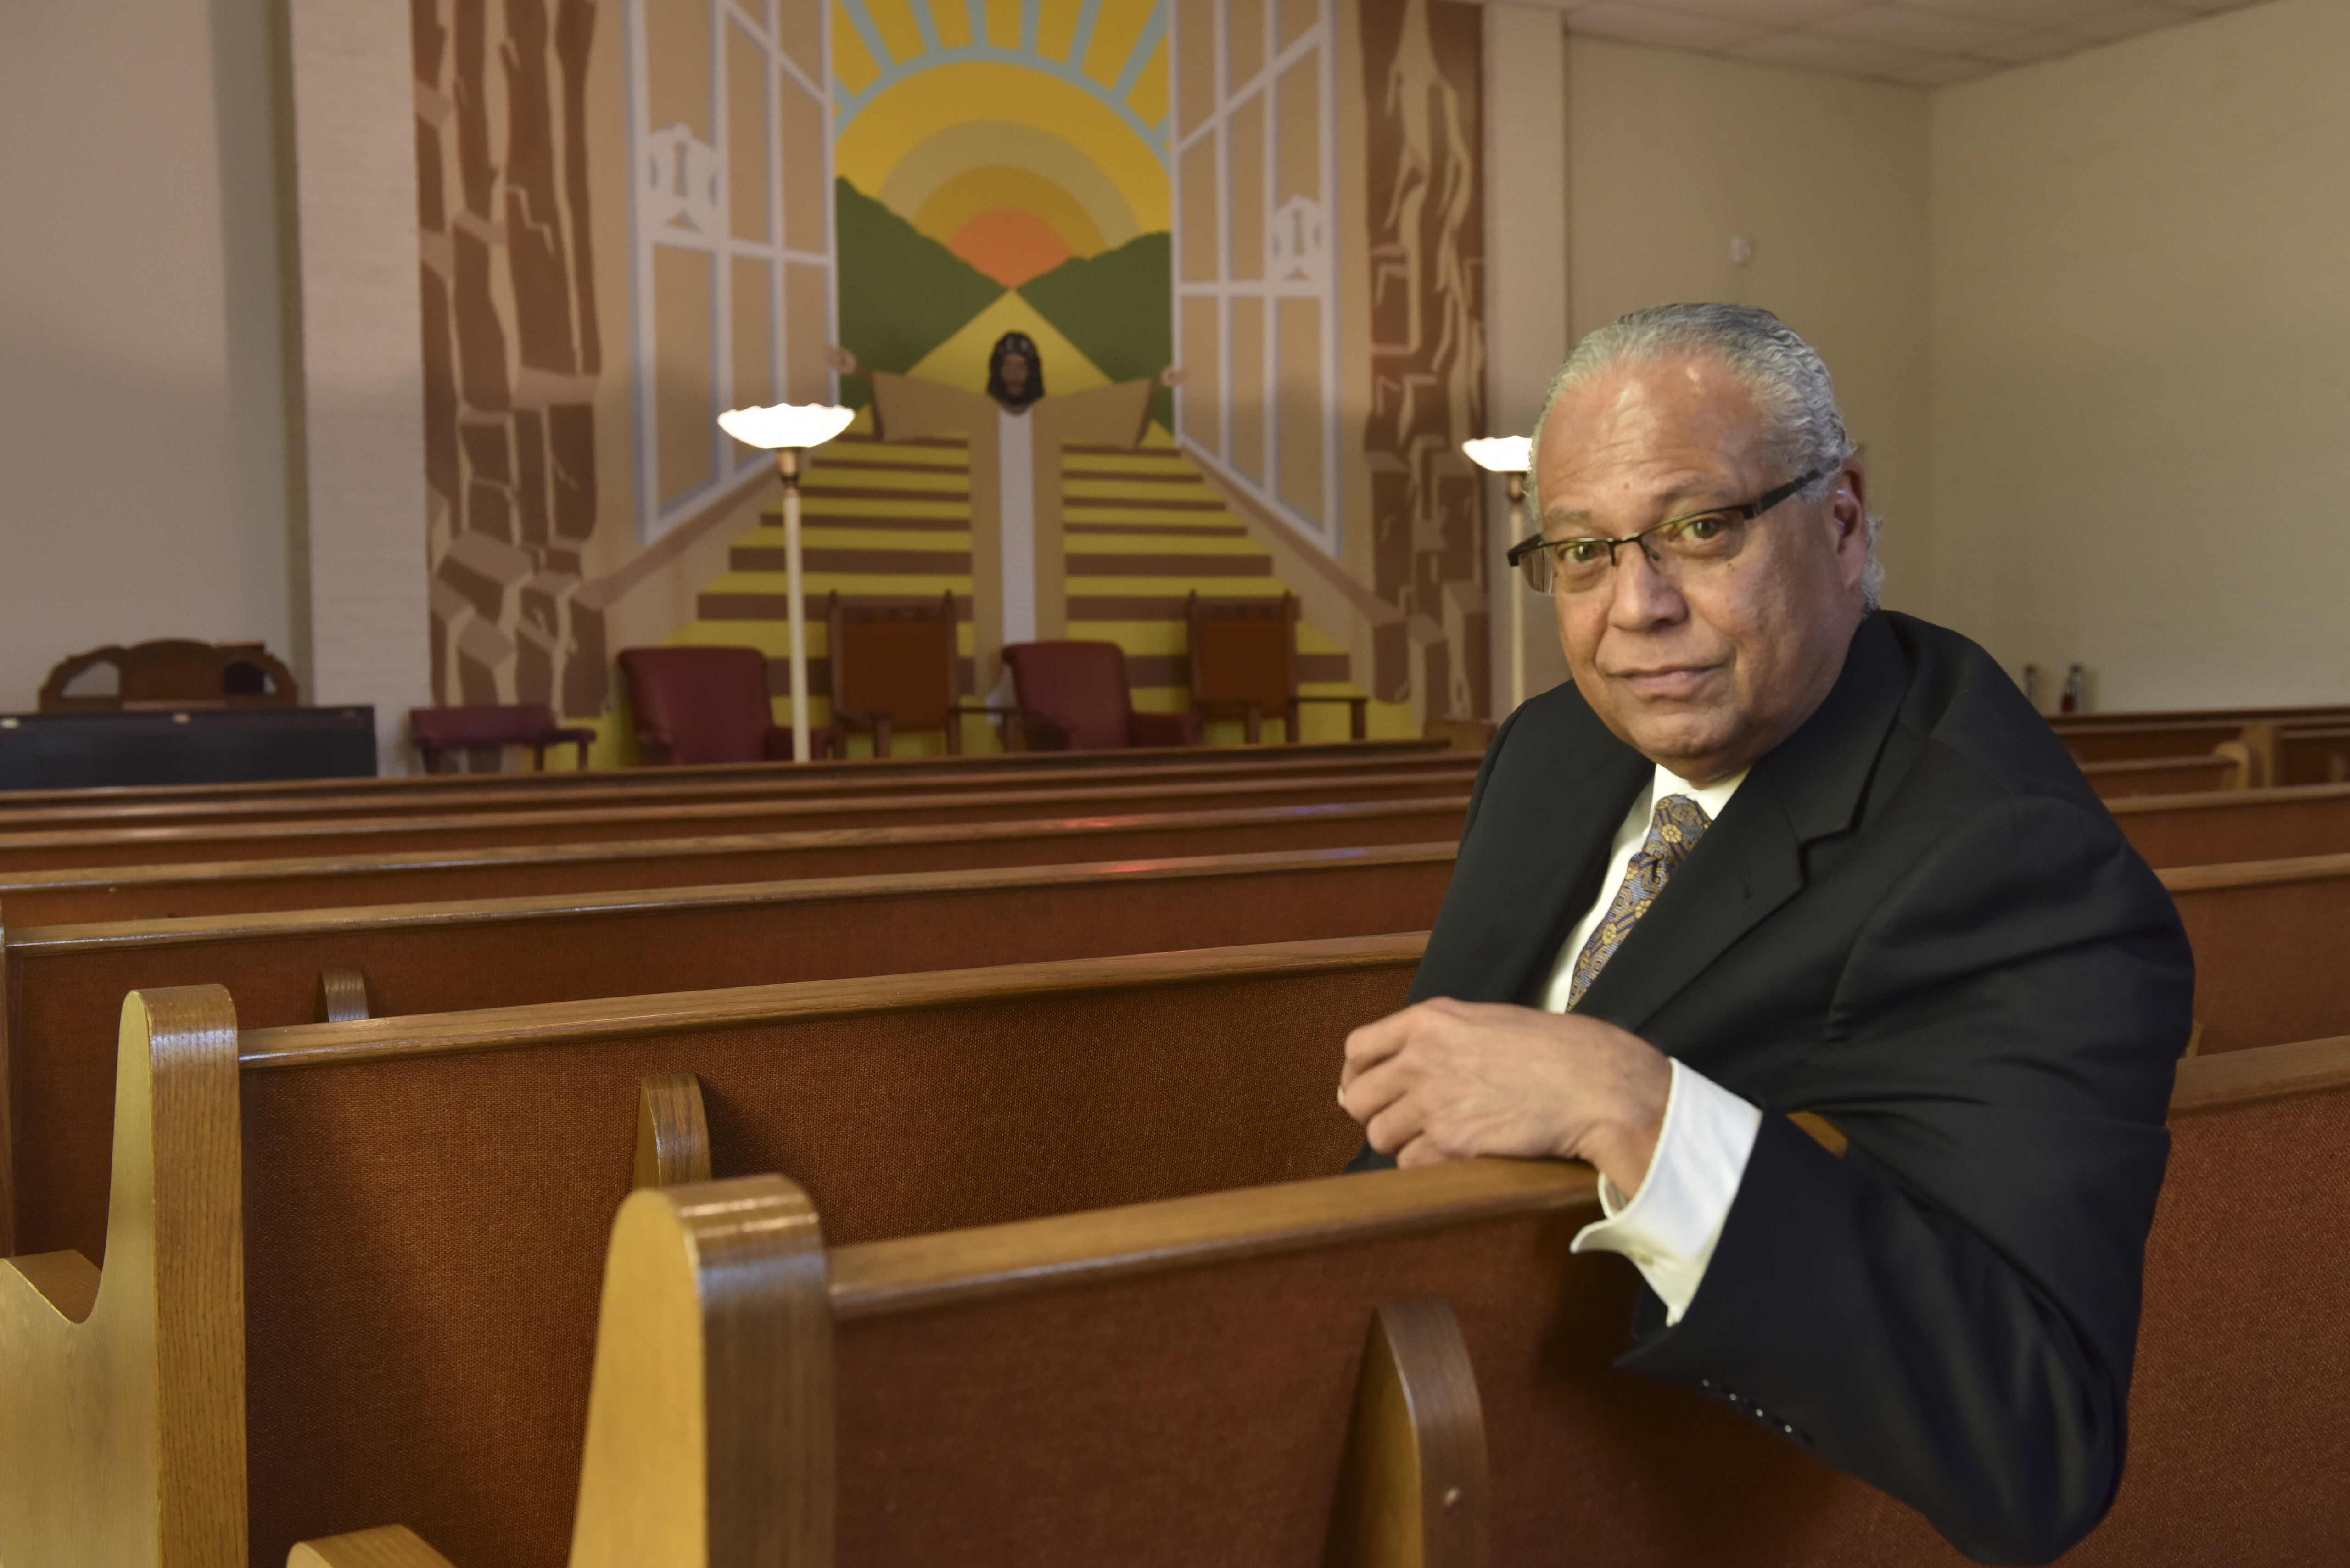 Mr. Marion P. Sterling, President of Davenport and Harris Funeral Home sits it the chapel of the Birmingham, Alabama funeral home. Birmingham area funeral home directors reflect on the violence plaguing the area. (Frank Couch / The Birmingham Times )